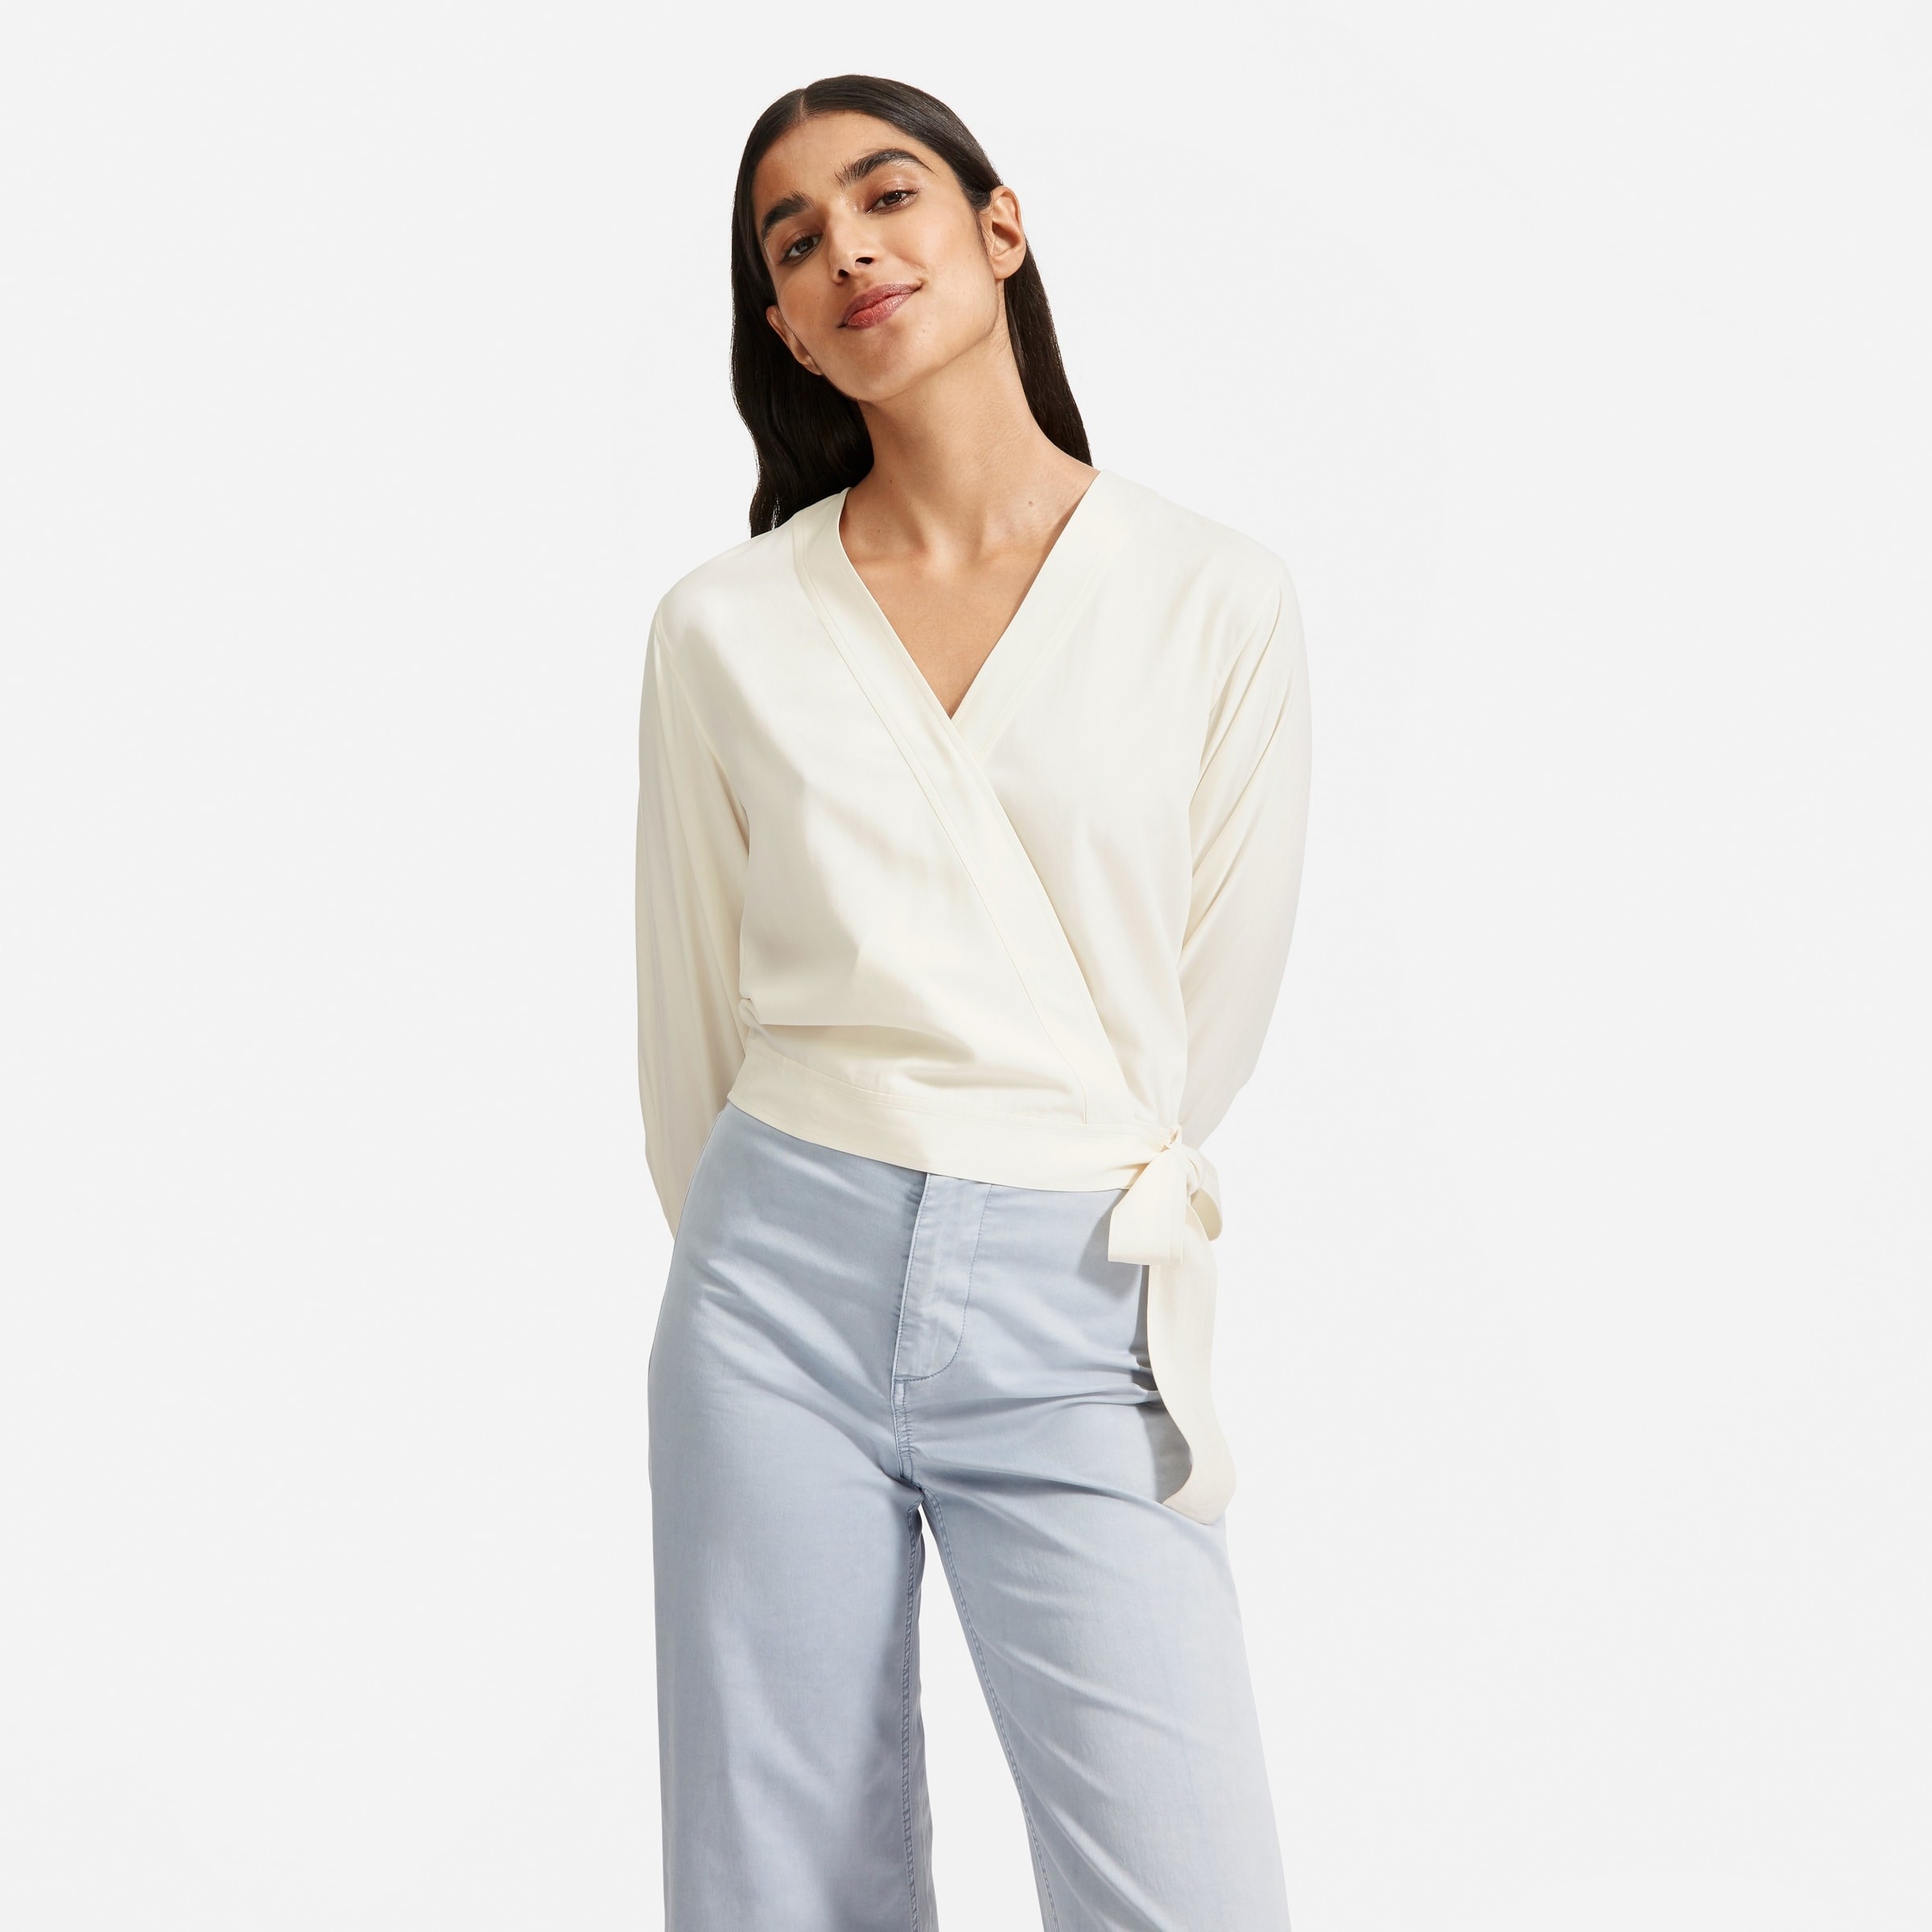 There's A Big Sale Right Now At Everlane, So If You Need To Stock Up On ...